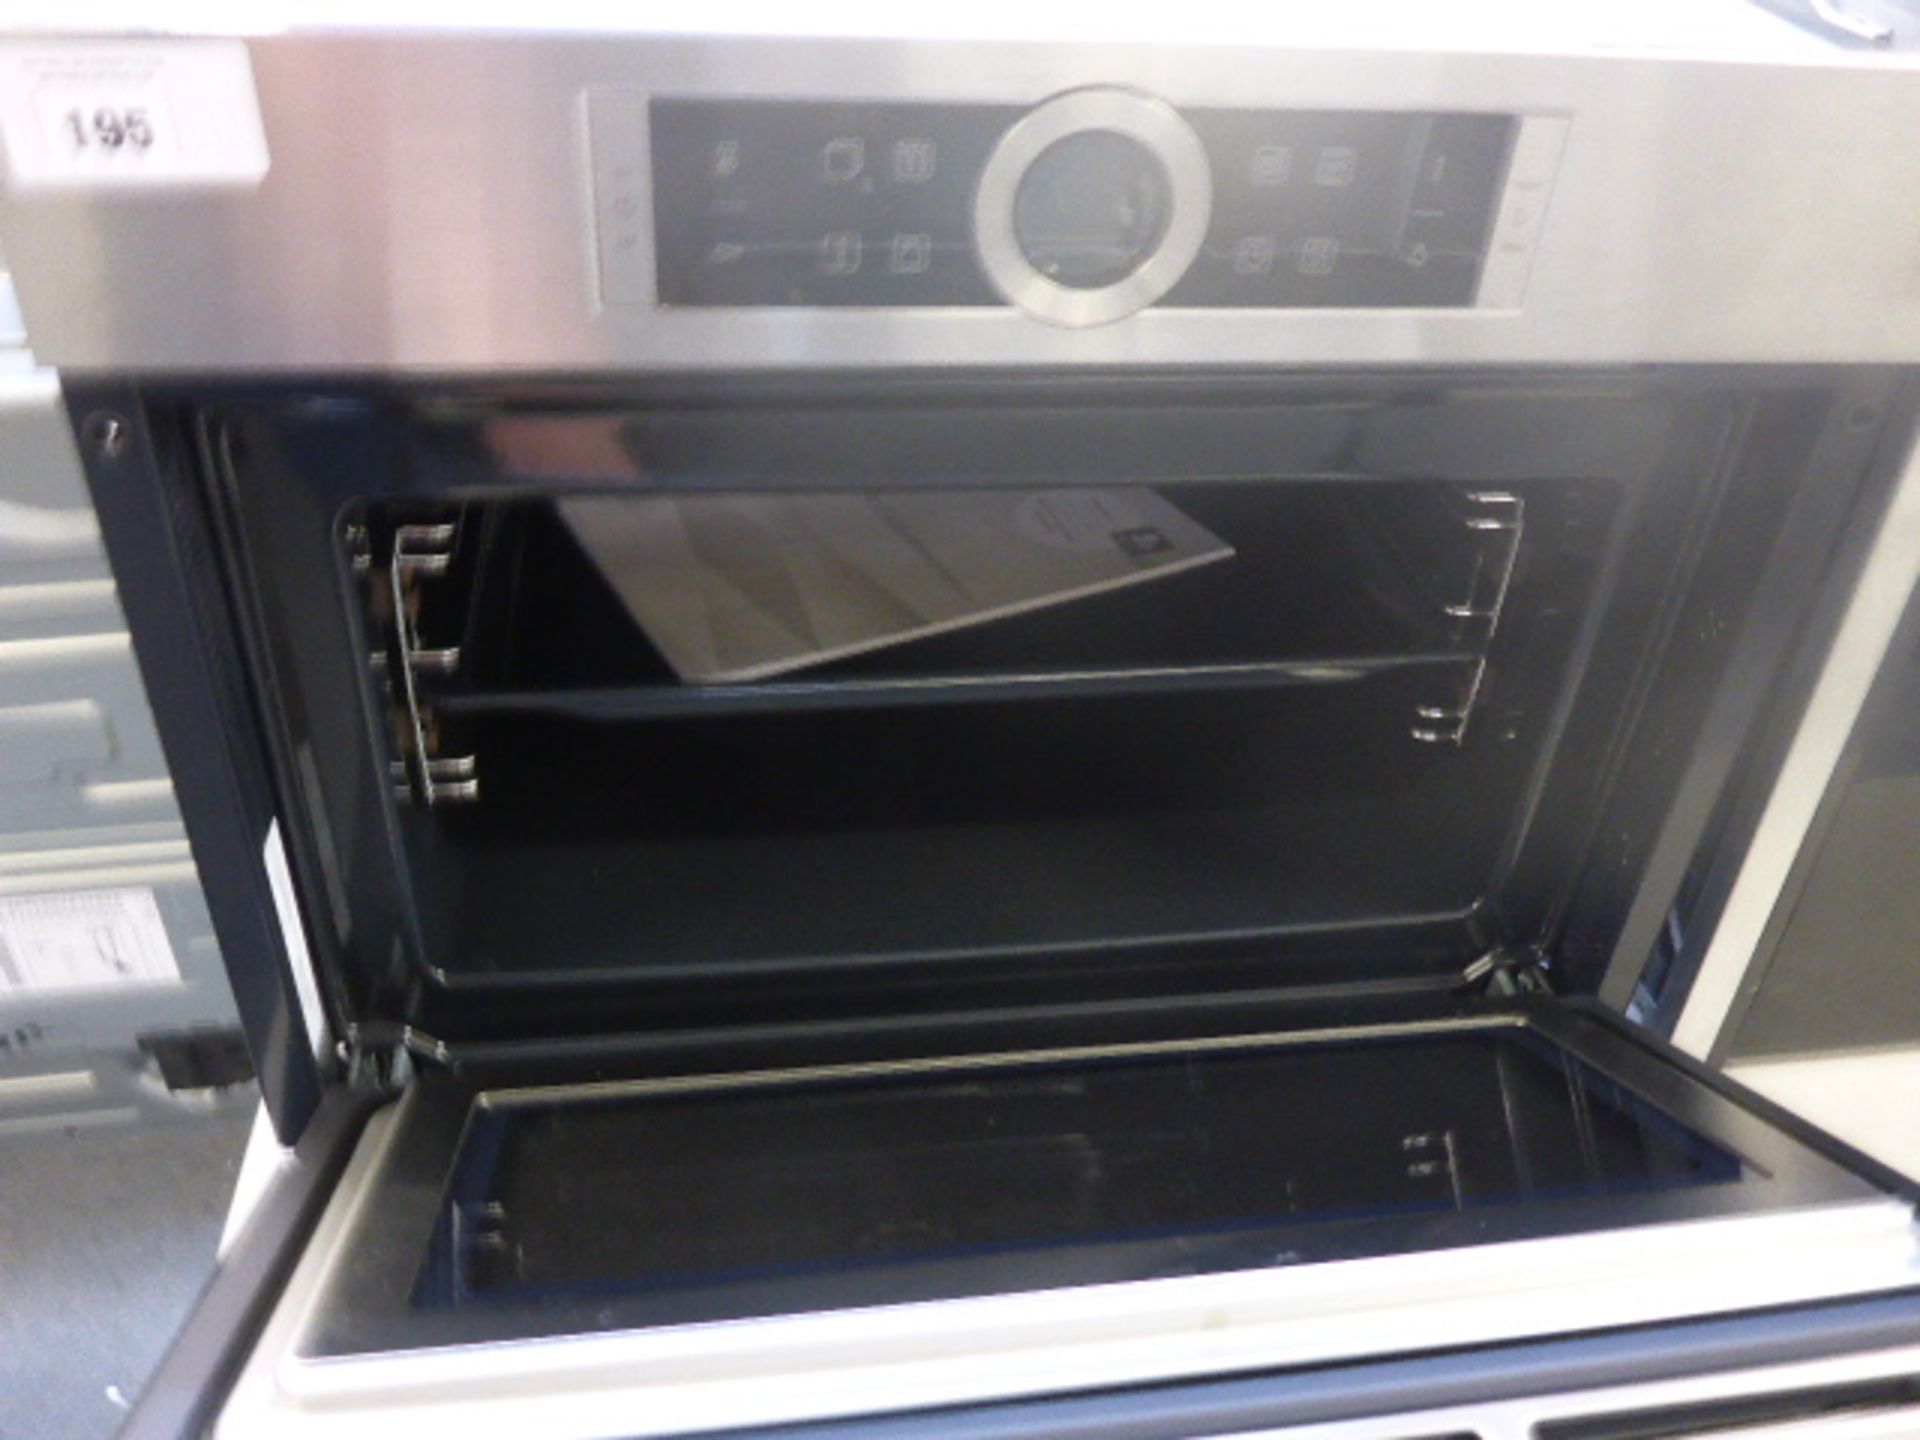 CMG633BS1B Built In Compact Electric Single Oven - Image 2 of 2